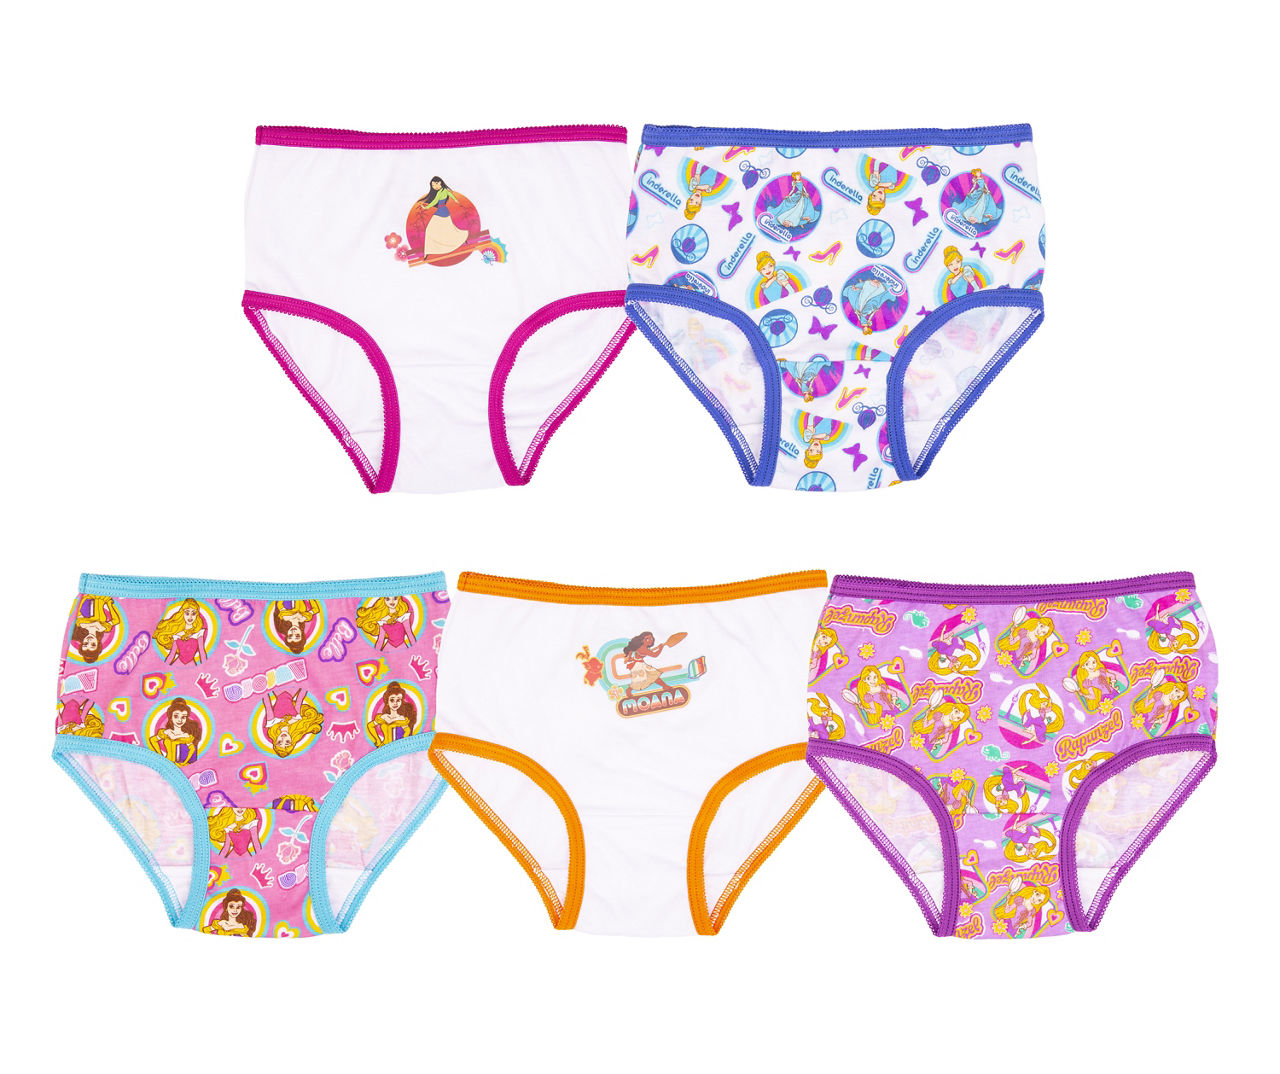 Toddler Size 4T White, Pink & Purple Briefs With Coloring Page, 5-Pack